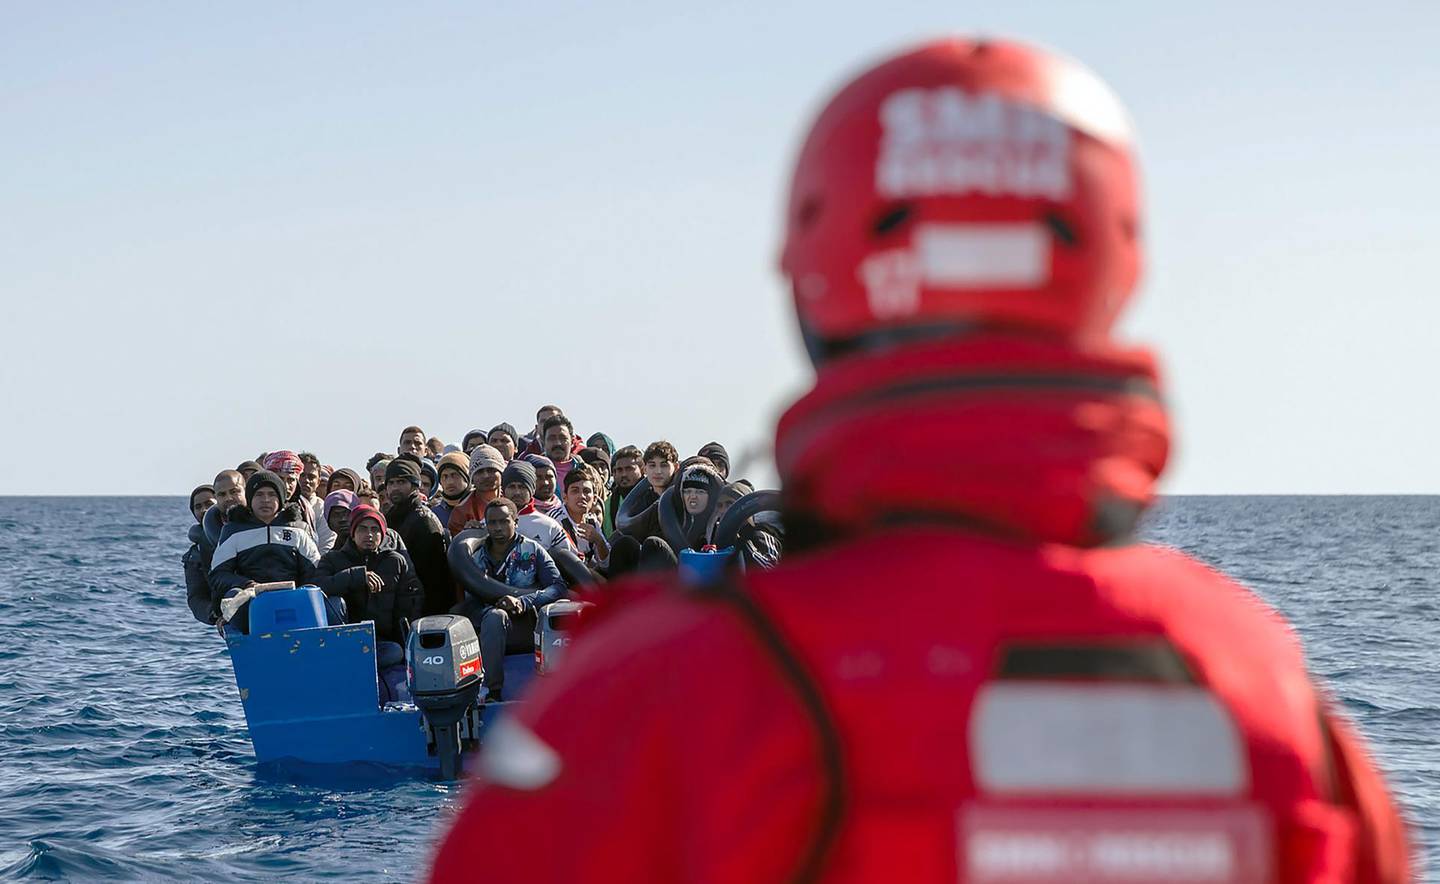 Migrants from Bangladesh, Afghanistan and Pakistan wait for being taken to the Spanish NGO Maydayterraneo's Aita Mari rescue boat during the rescue of 65 migrants in the Mediterranean international waters off the Libyan coast on February 10, 2020. With the 65 people rescued today, a total of 158 migrants are aboard the Spanish rescue boat Aita Mari after yesterday other group of 93 African migrants were rescued by the Maydayterraneo NGO off the coast of Libya. / AFP / Pablo Garcia
